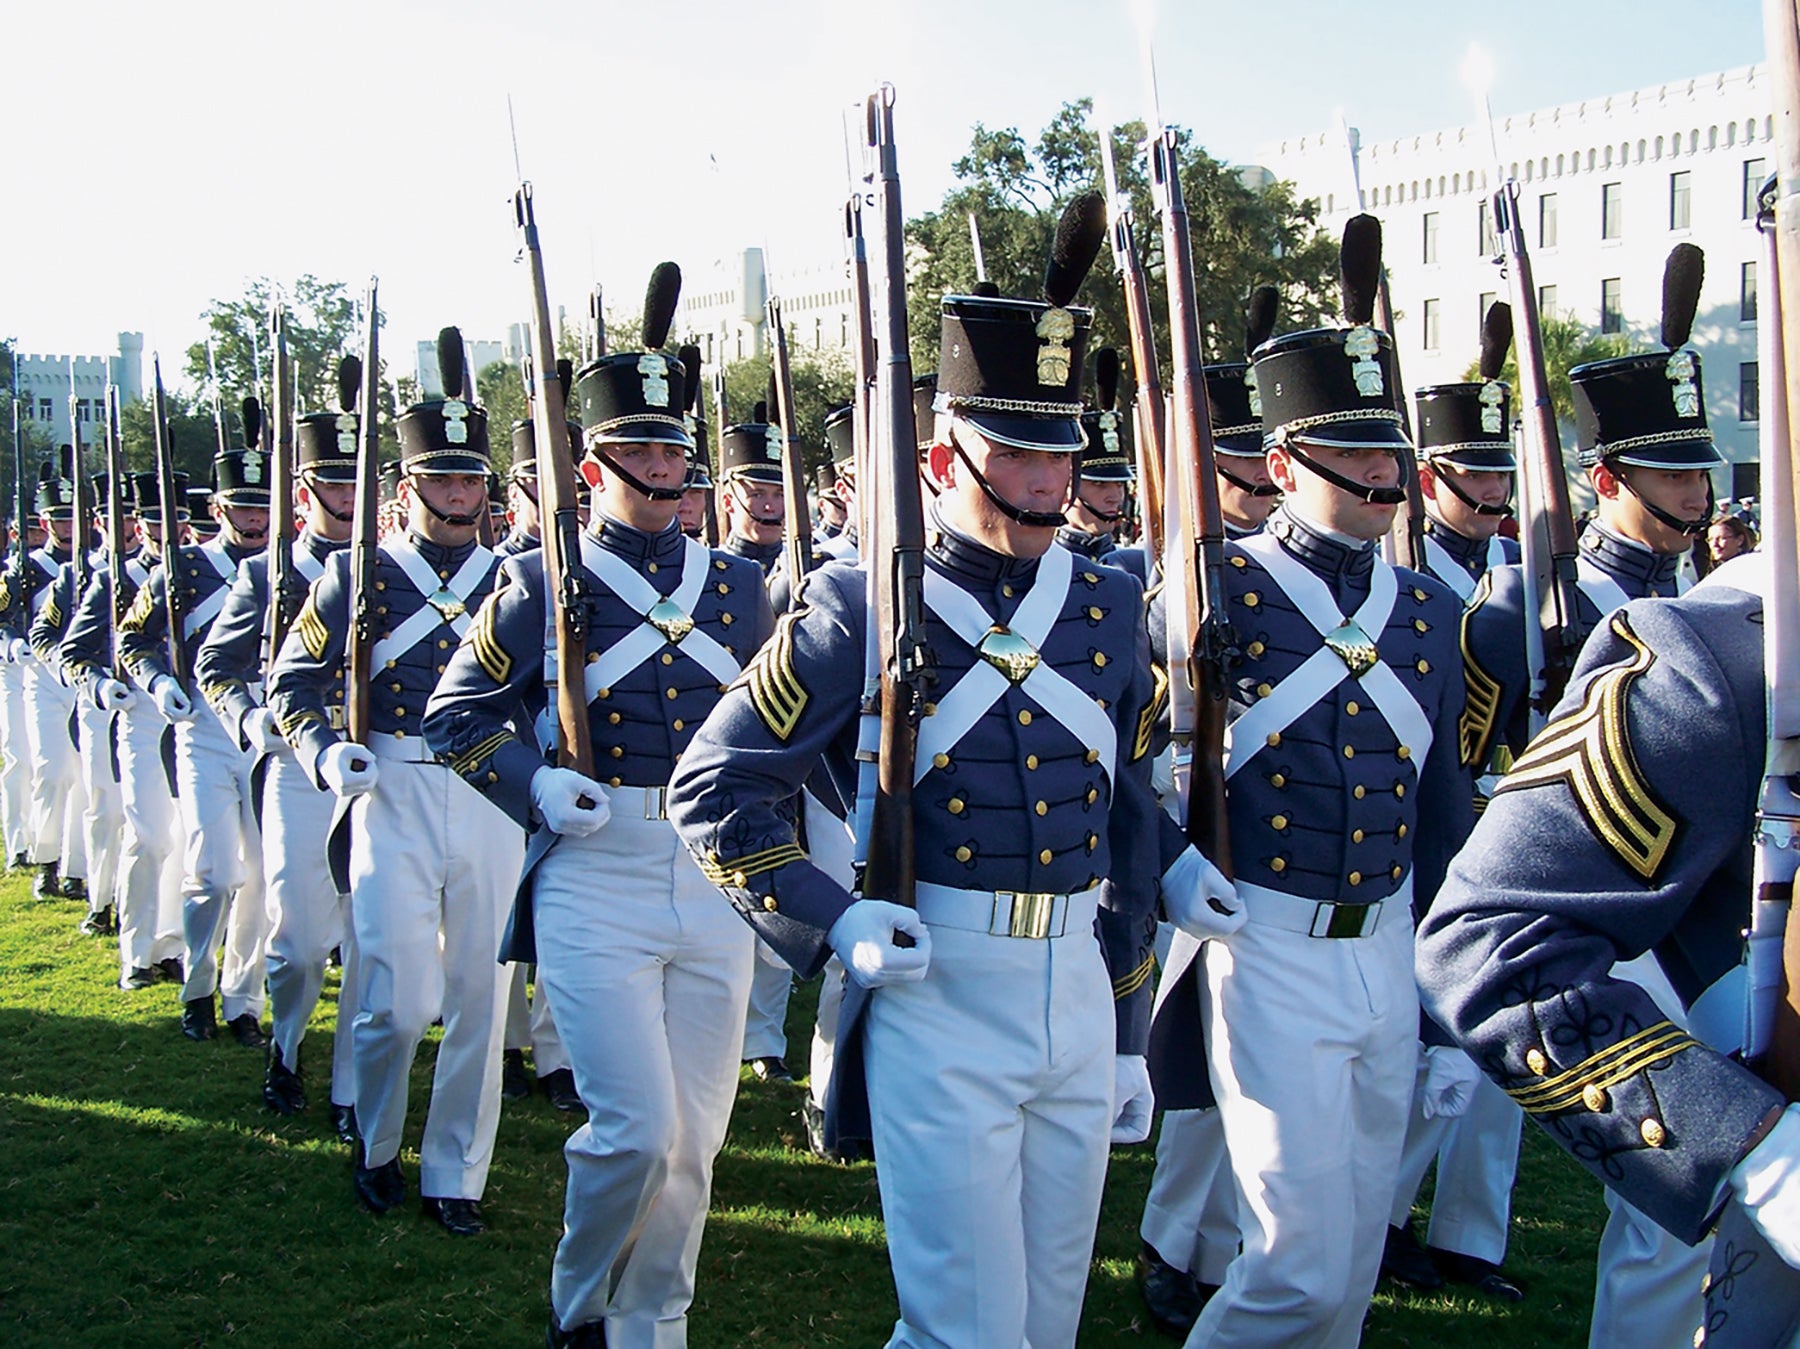 The Summerall Guards, a drill platoon at The Citadel, South Carolina, are put through their paces. (Credit: Wikipedia)